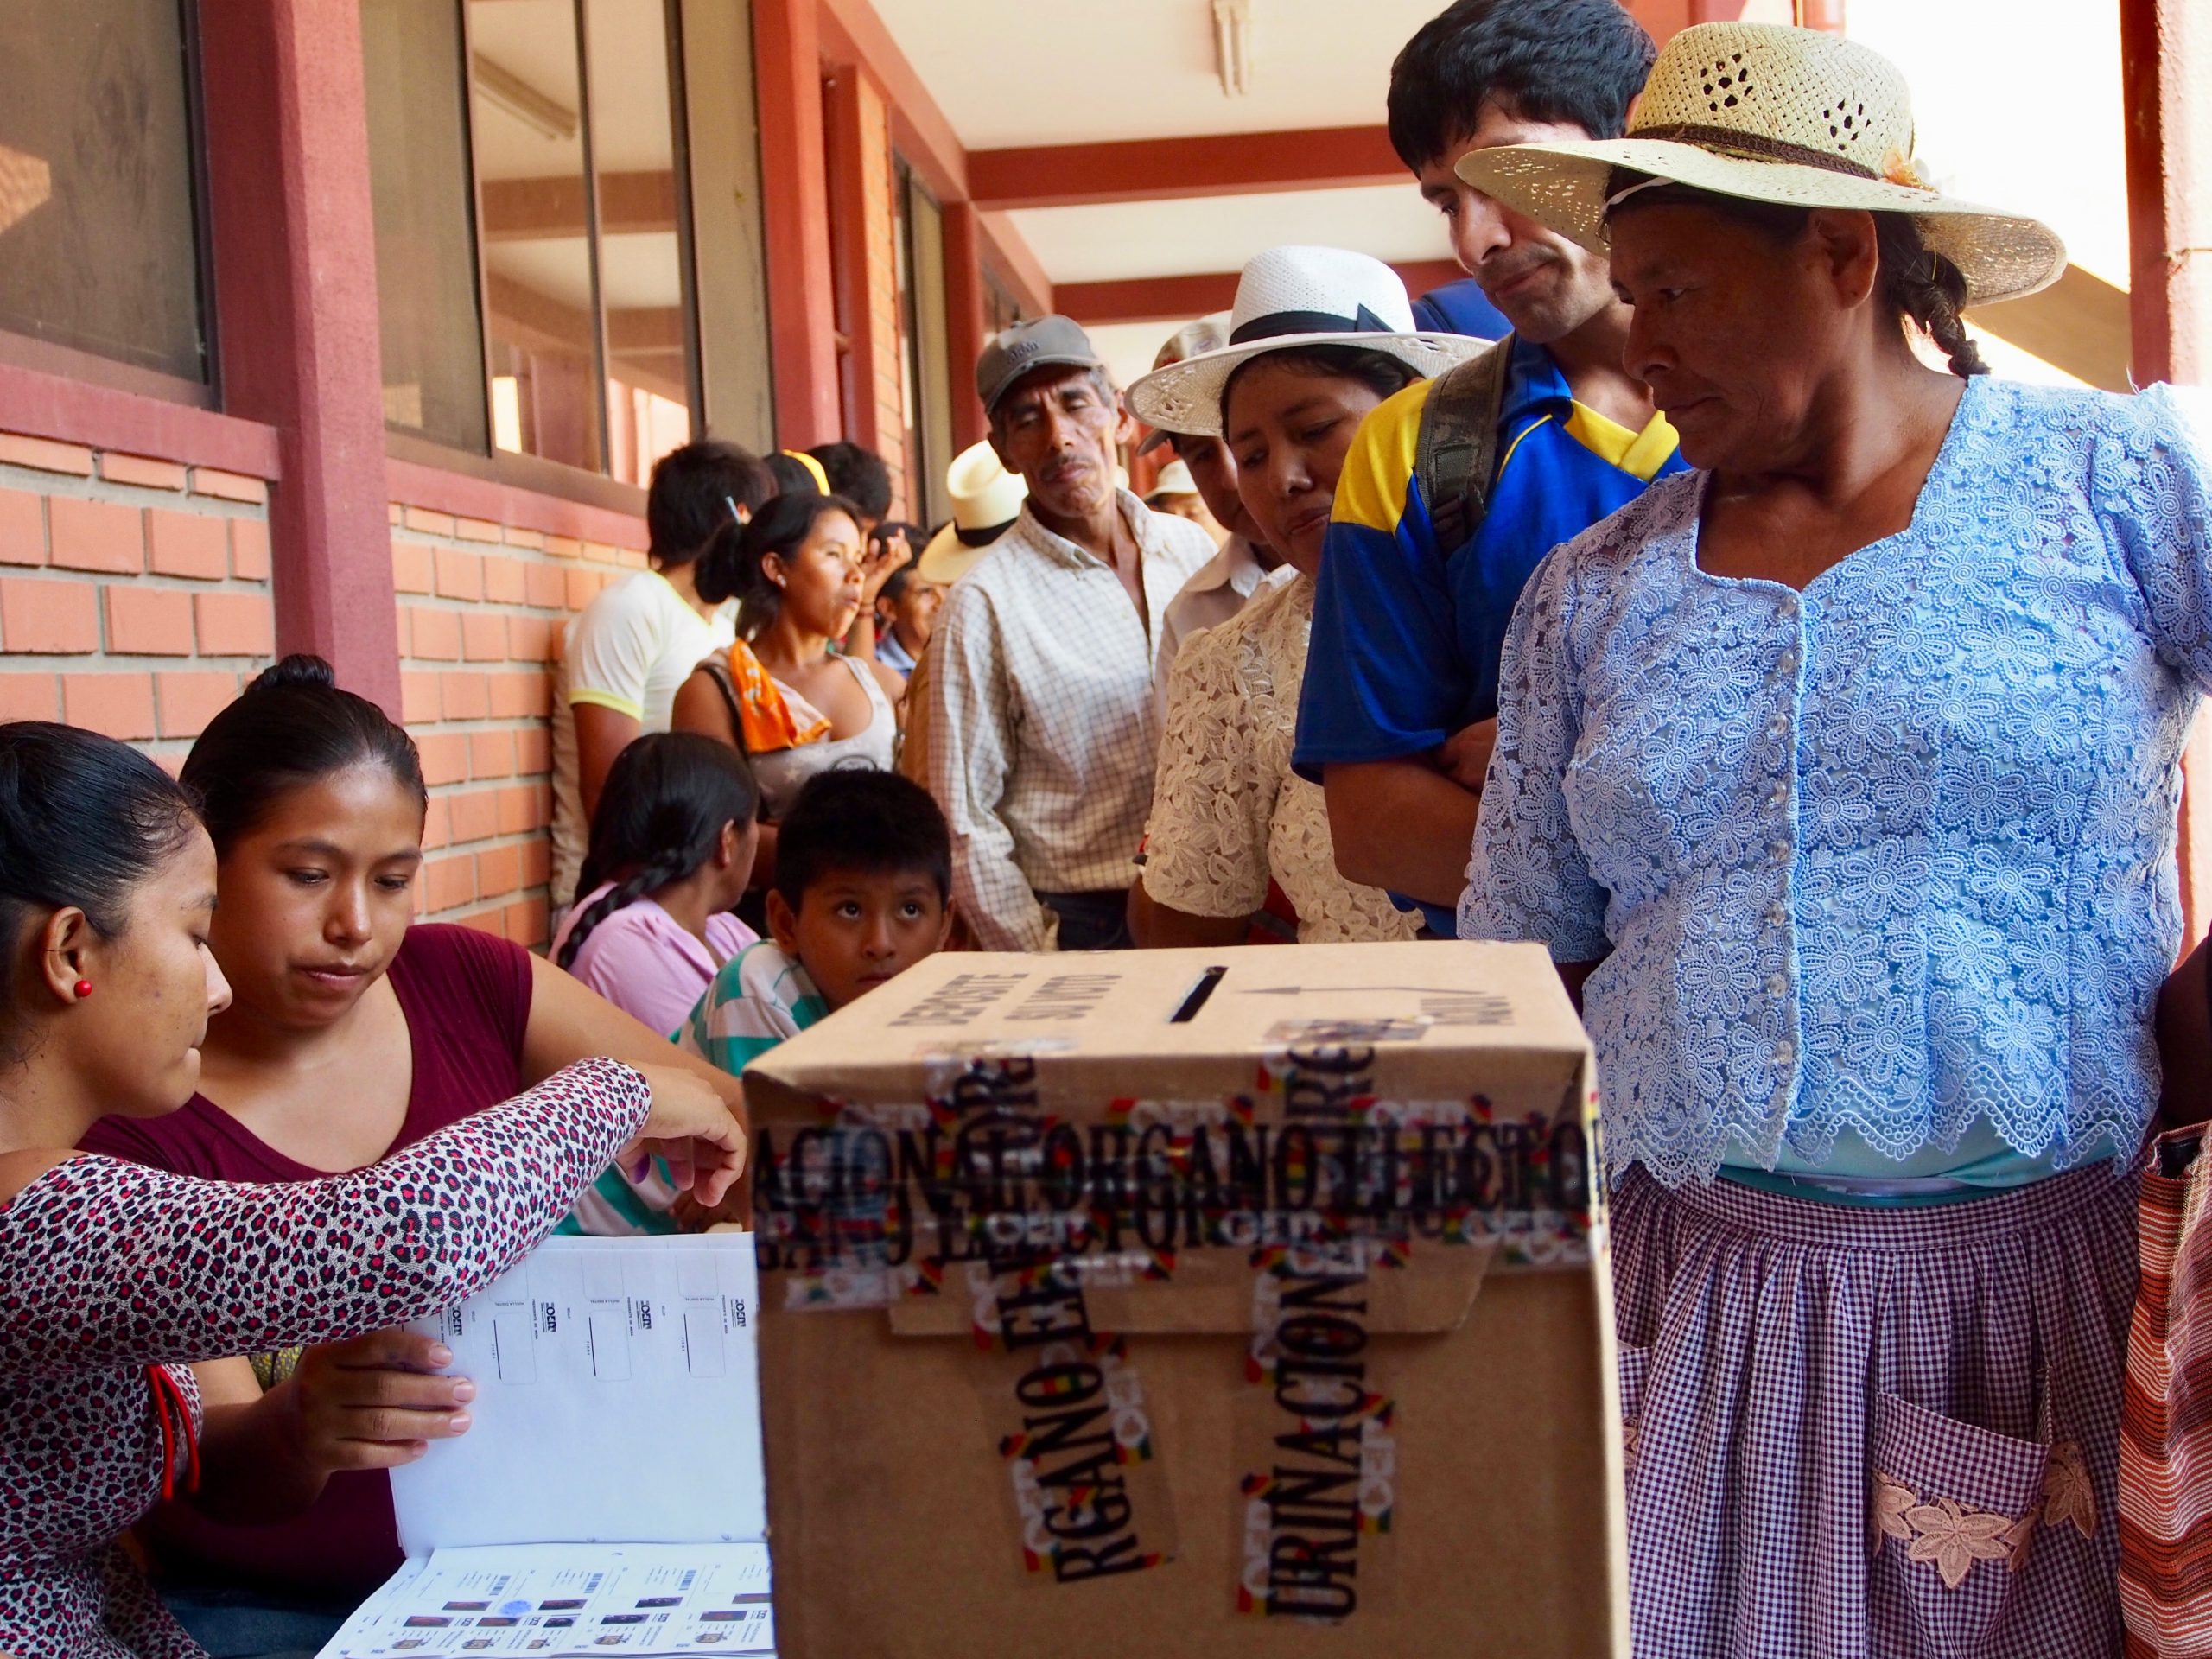 Bolivia at the Ballot Box: Will Elections Provide a Path to Peace, or Plunge the Country into Renewed Crisis? Featuring team member Kathryn Ledebur